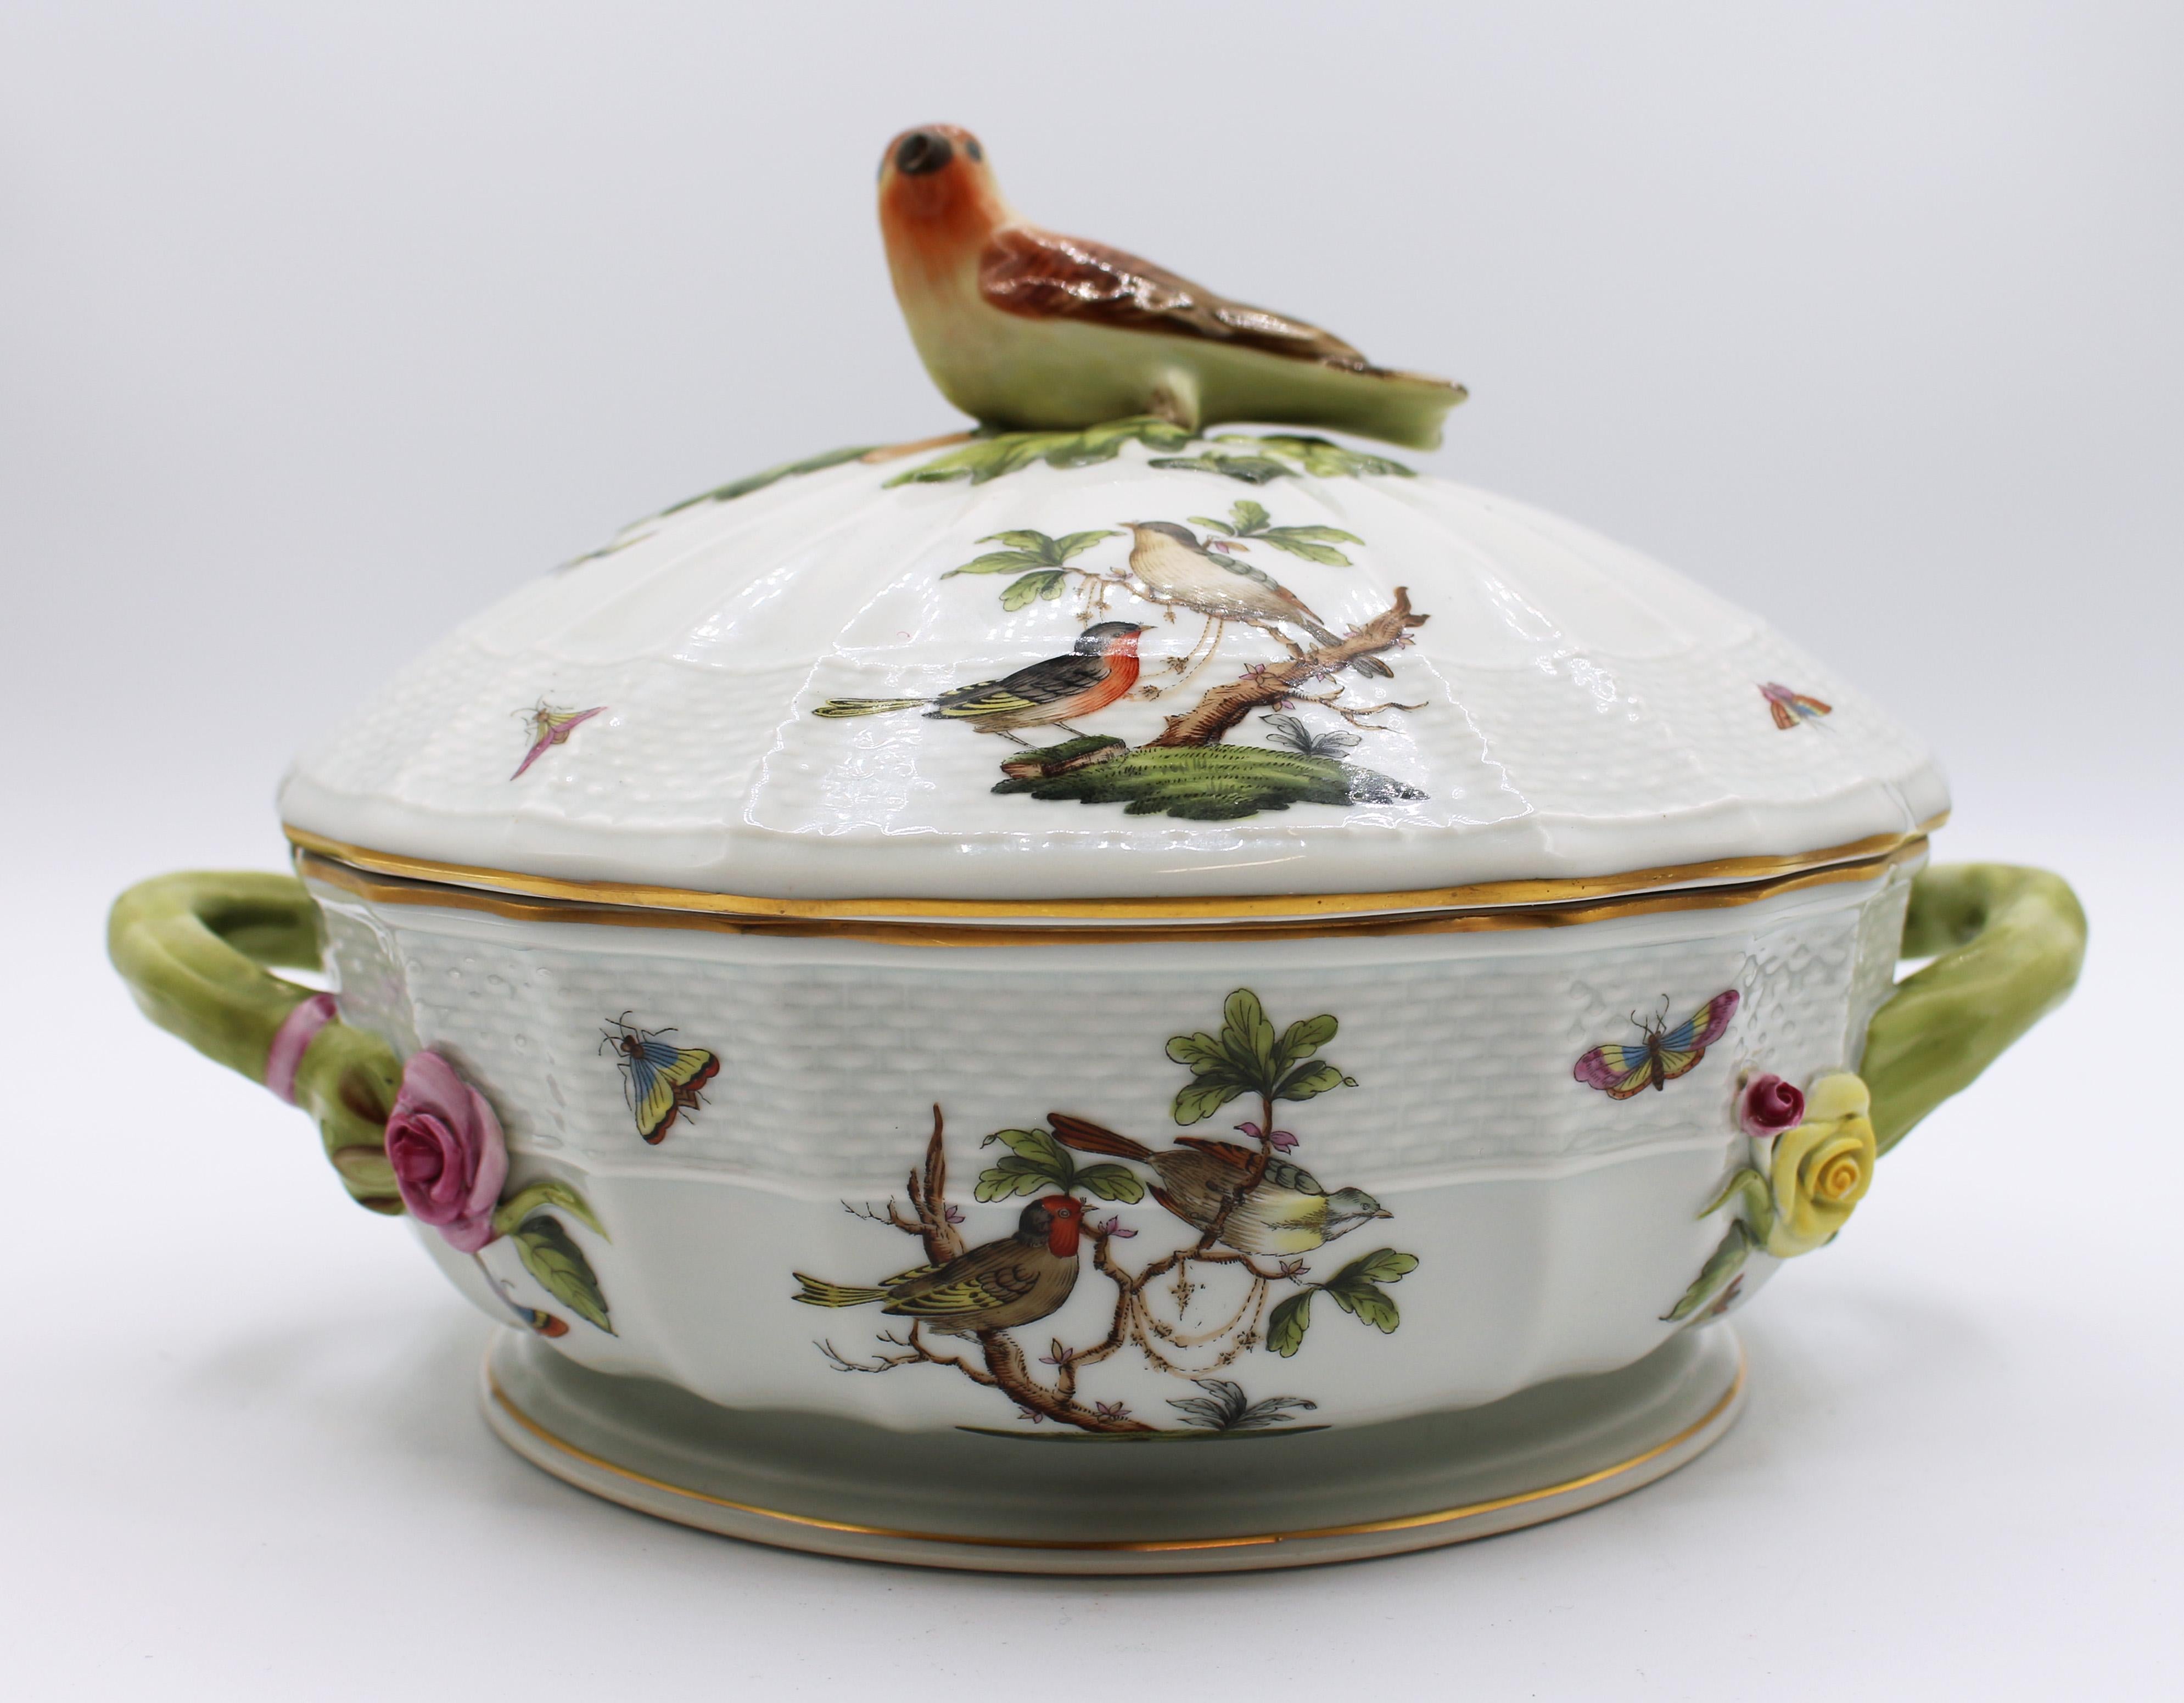 Vintage Herend Rothschild Bird large covered vegetable dish. Hand painted with three dimensional flowers & bird finial. Marked: Herend Hungary Handpainted 1090/RO. 11 1/2